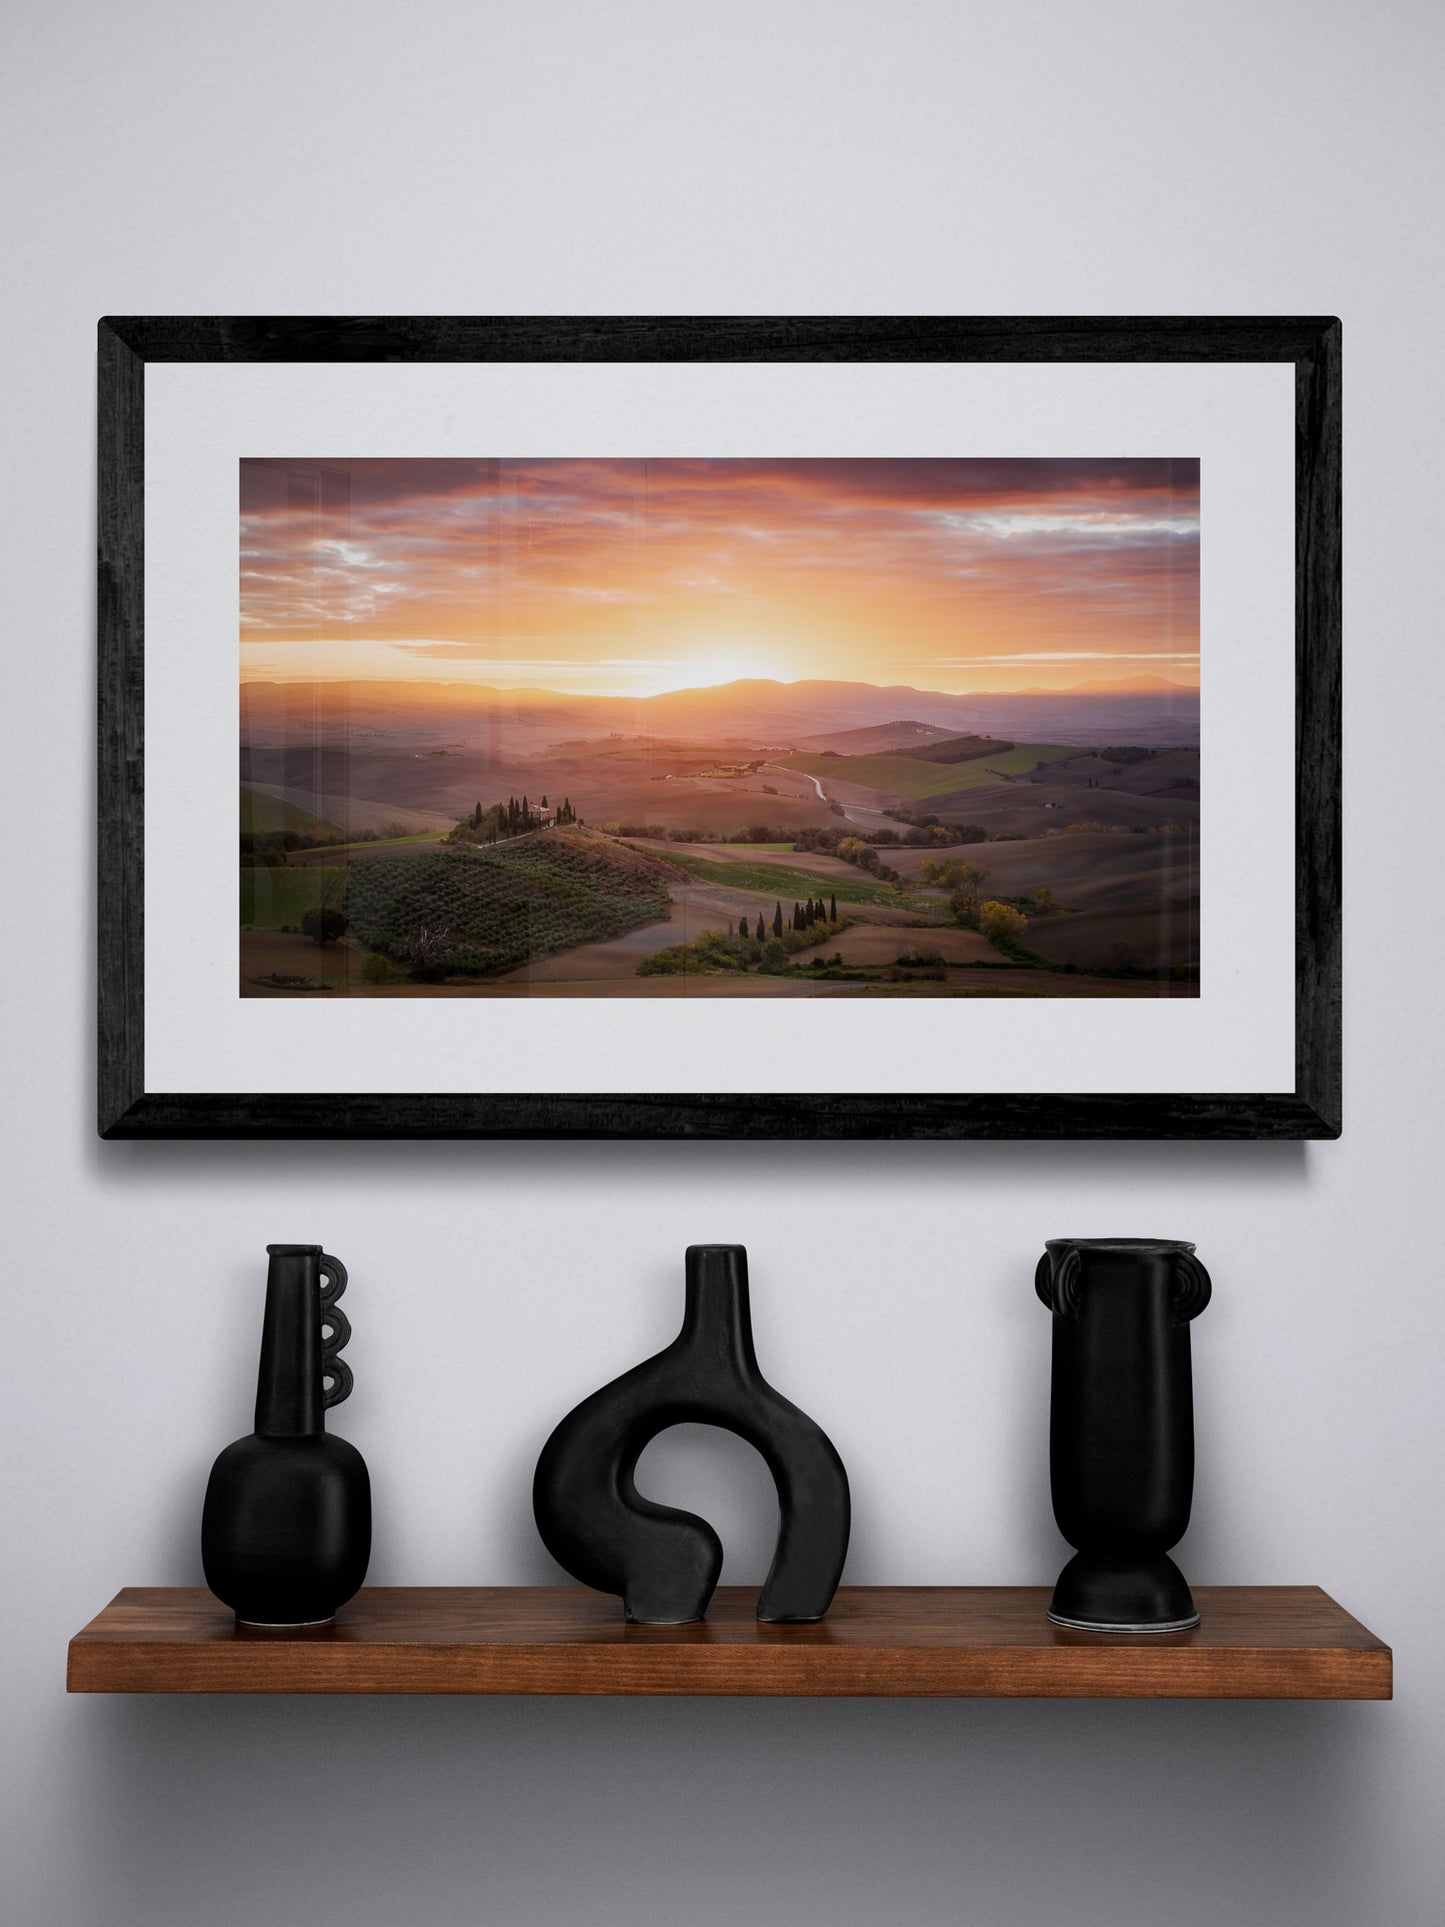 Image Title: Morning Glory Photographer: Marcus Danz Location: Val D'orcia, Italy Image description: The rolling hills of Tuscany and Podere Belvedere are caressed by the soft light of the morning sky. High quality Fine Art print up to 36 inch / around 90 centimeters on Hahnemühle paper available. Small variant over shelf.